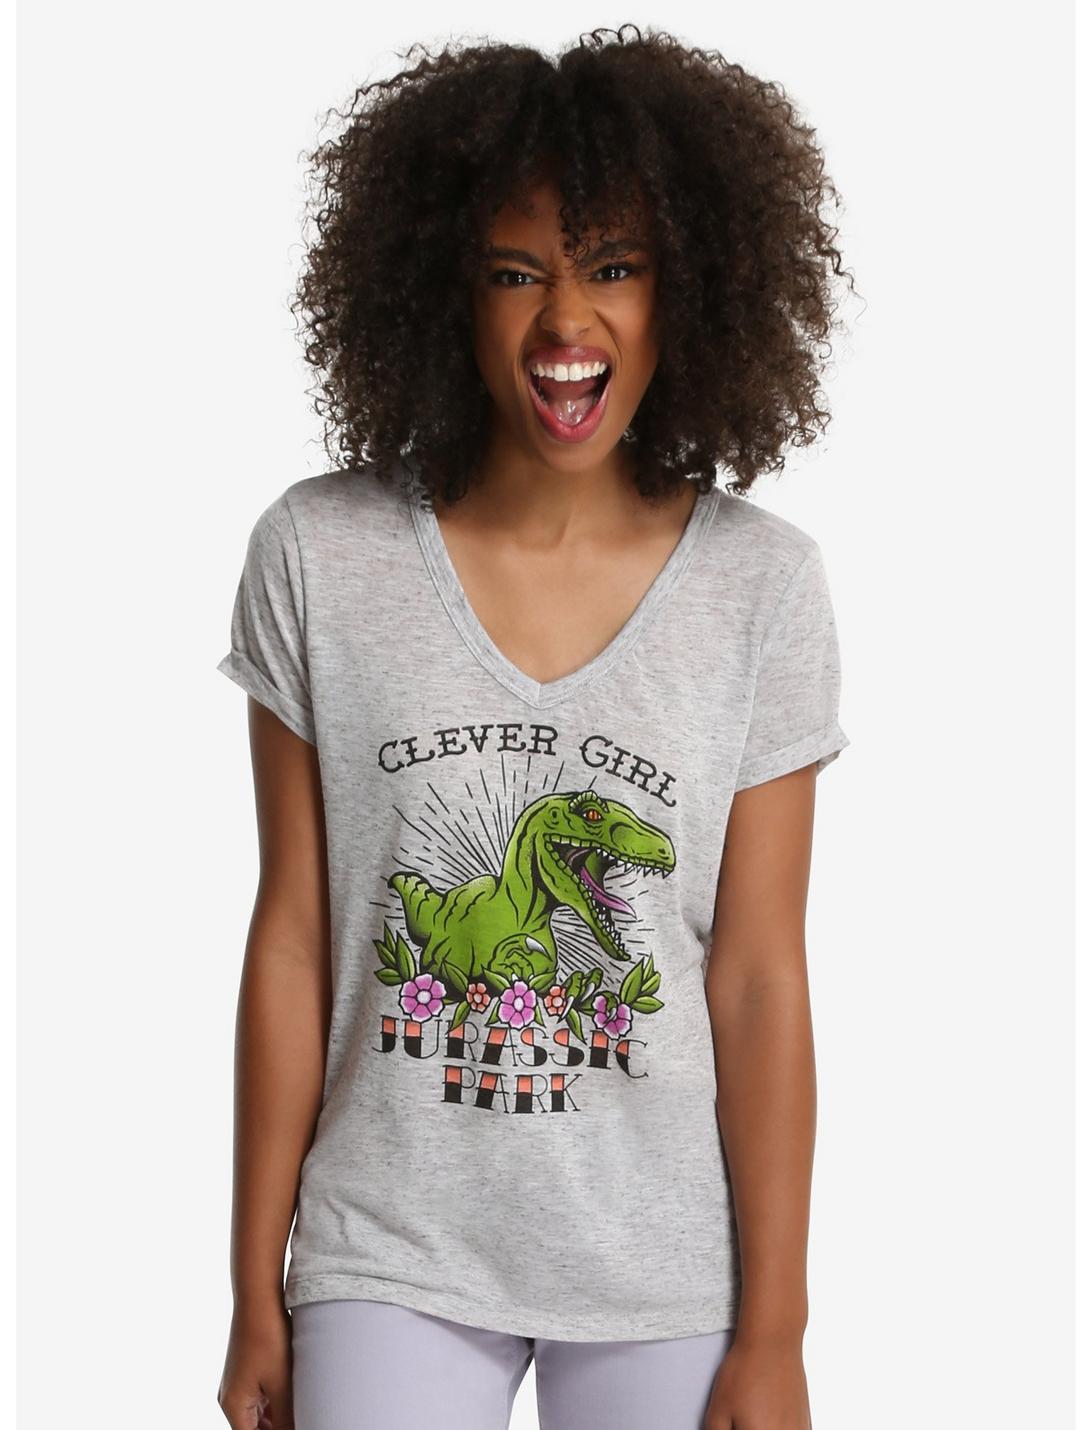 Jurassic Park Clever Girl Womens Tee, GREY, hi-res